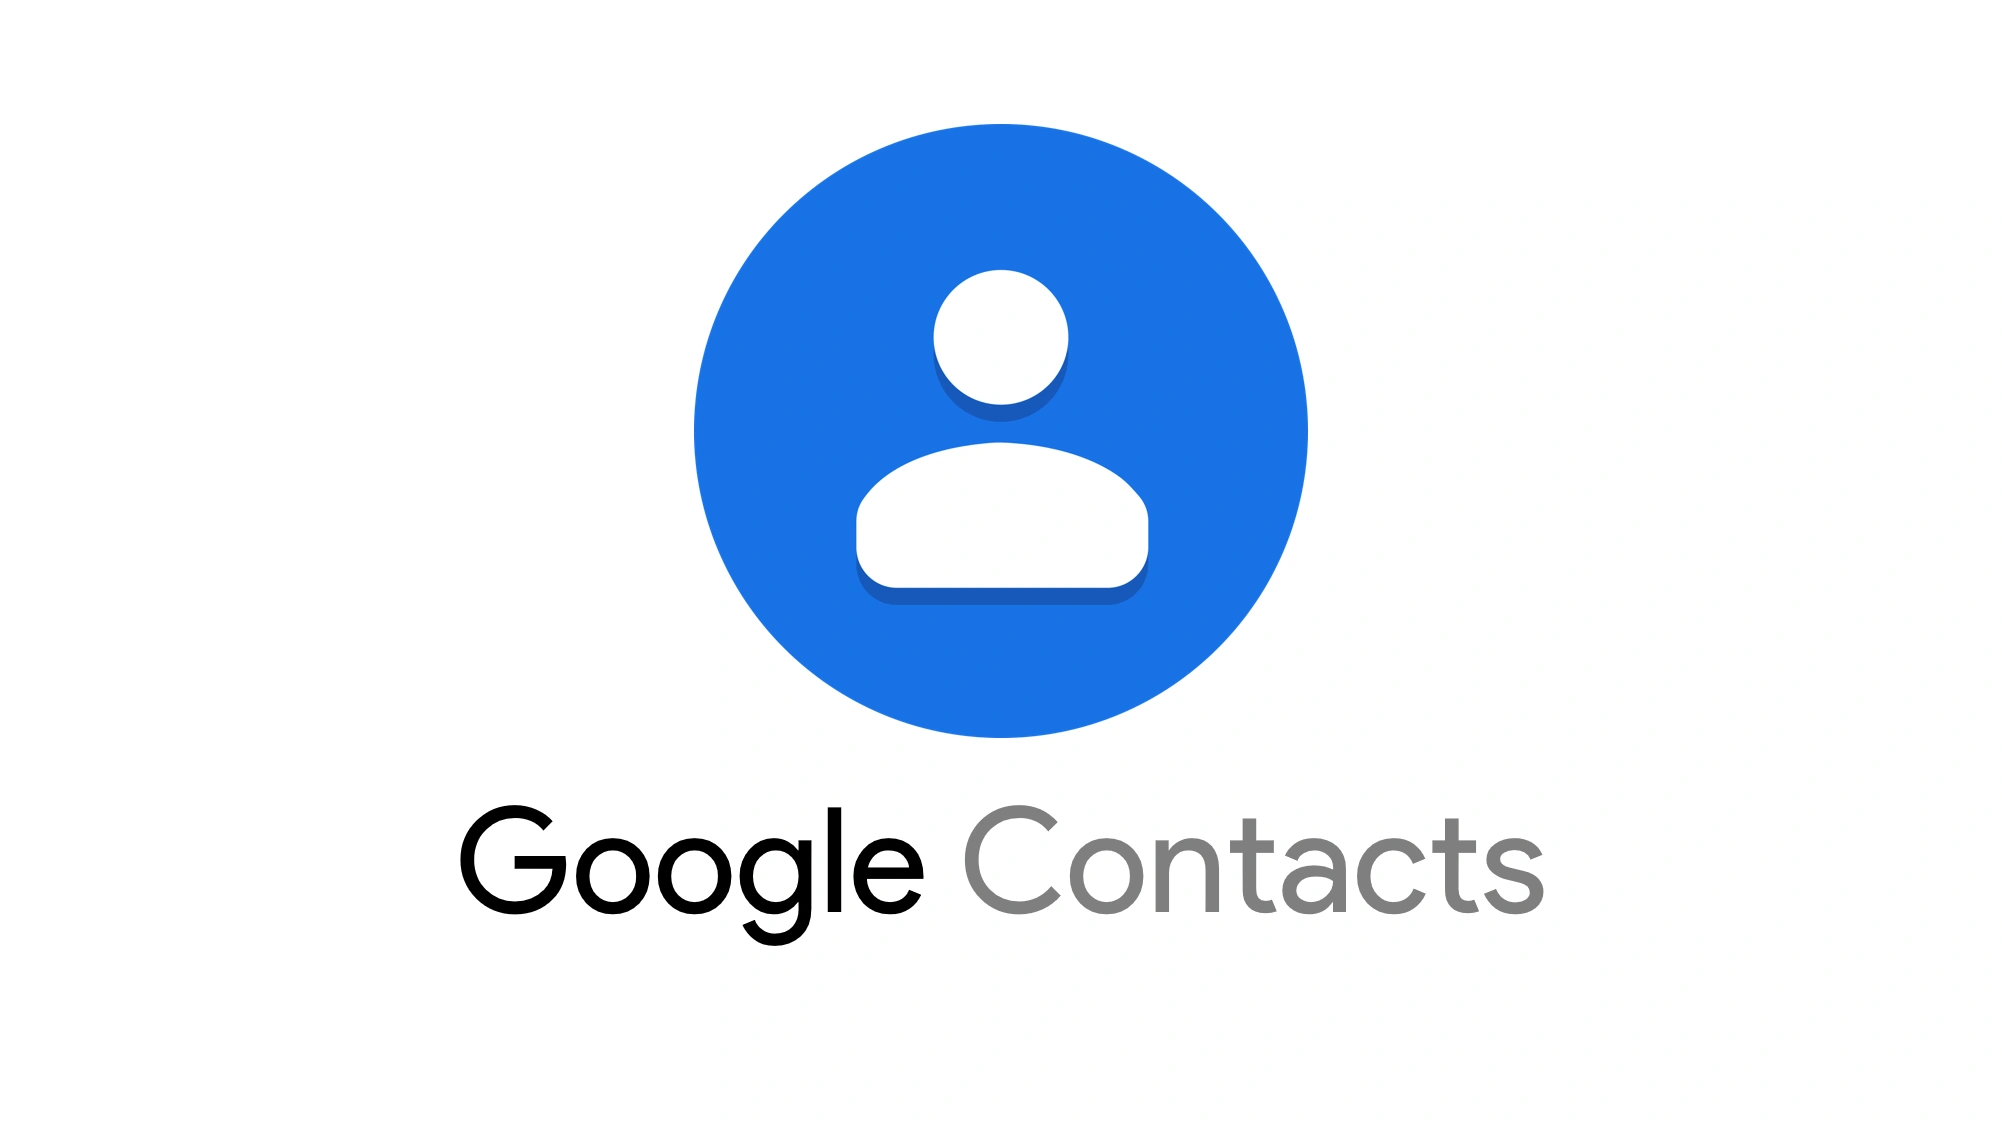 How to restore your Google Contacts image